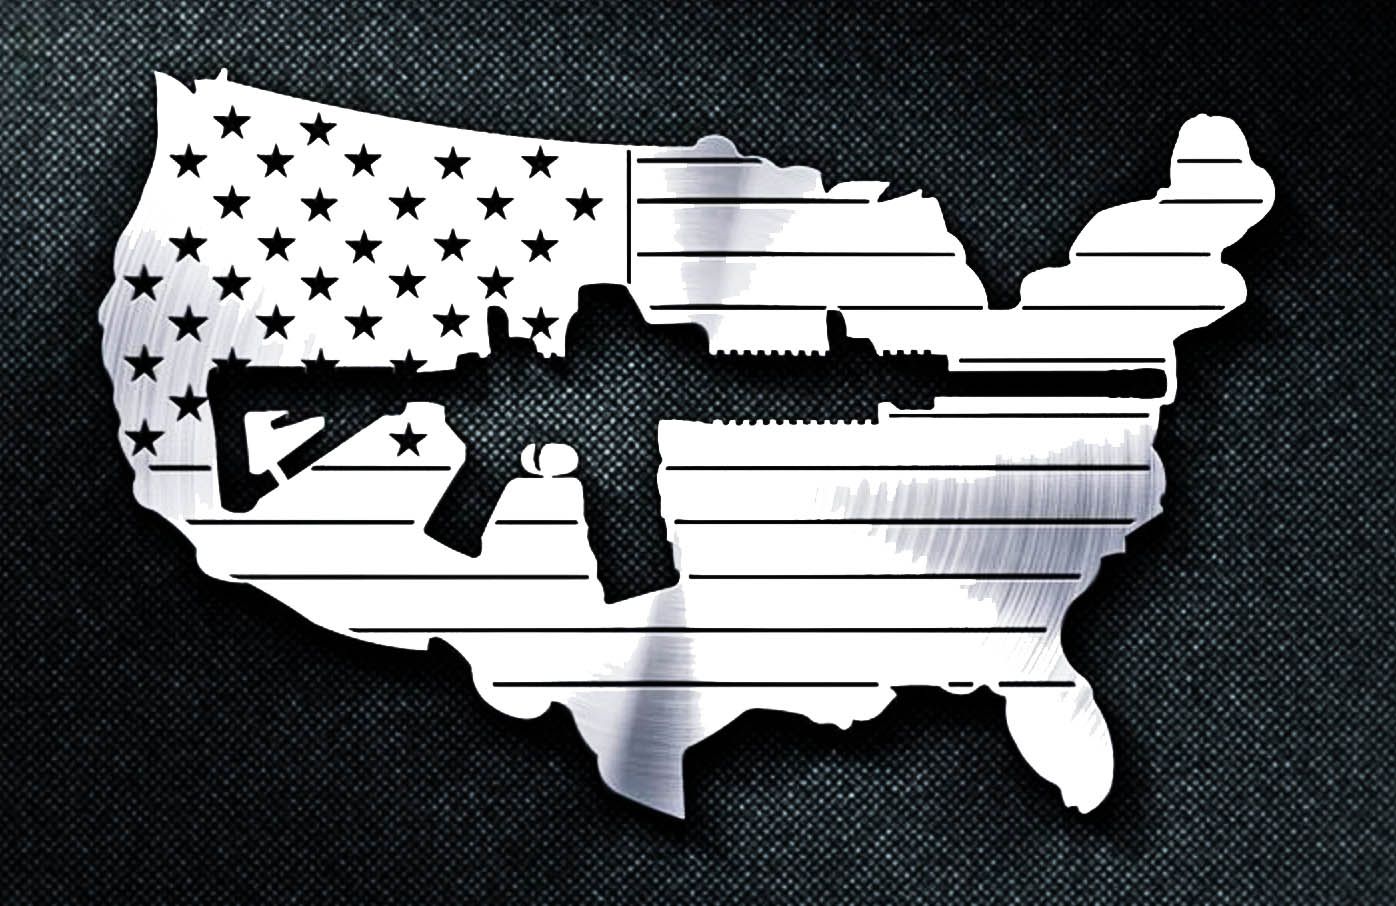 The 2022 Midterms and the Gun Rights Outlook